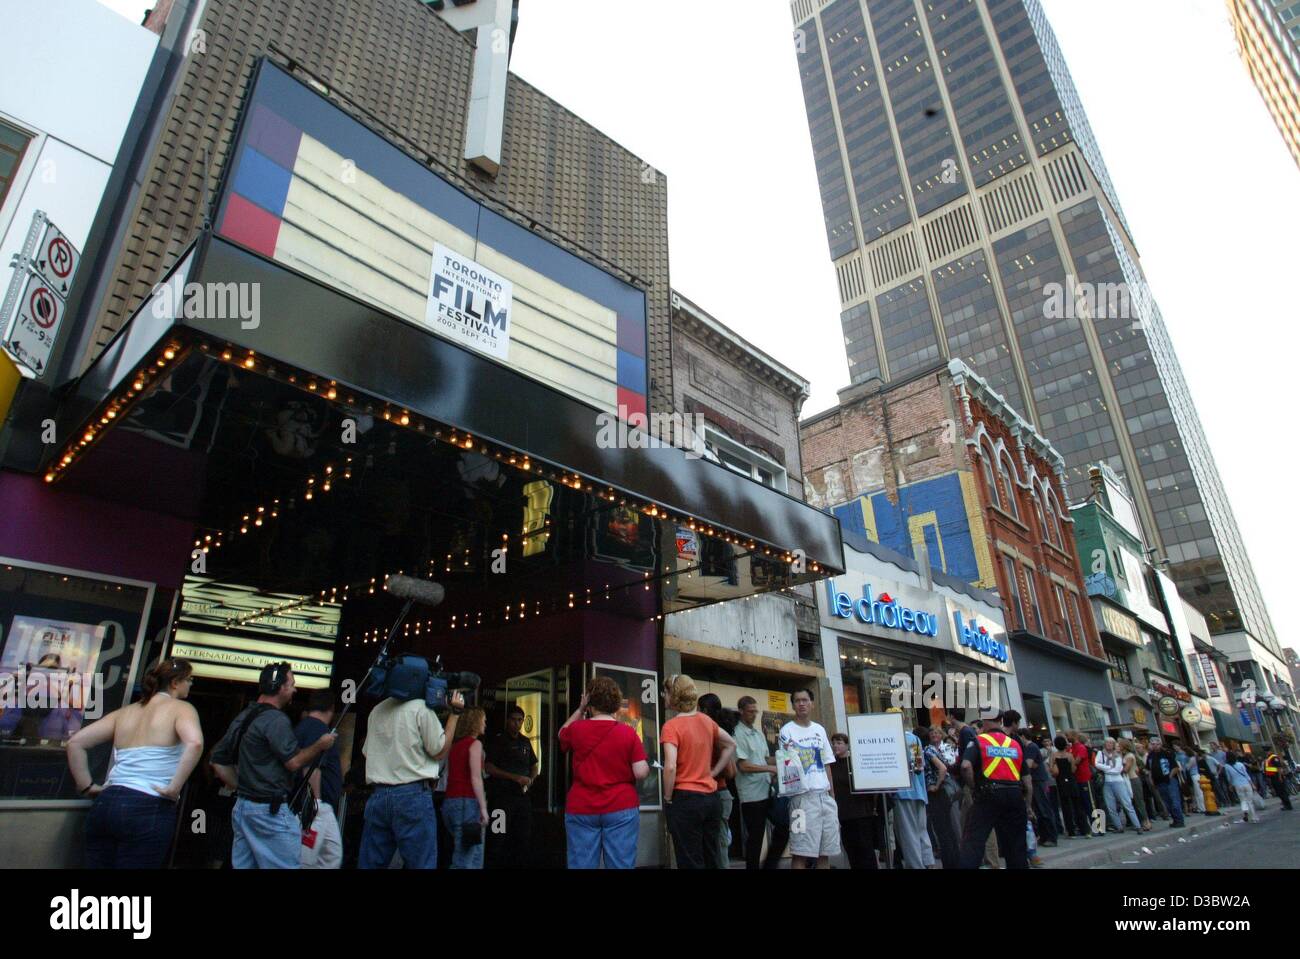 (dpa) - People queue at the entrance of the Uptown Theatre, one of the screening cinemas of the International Filmfestival in Toronto, Canada, 7 September 2003. The festival runs until 13 September. Stock Photo